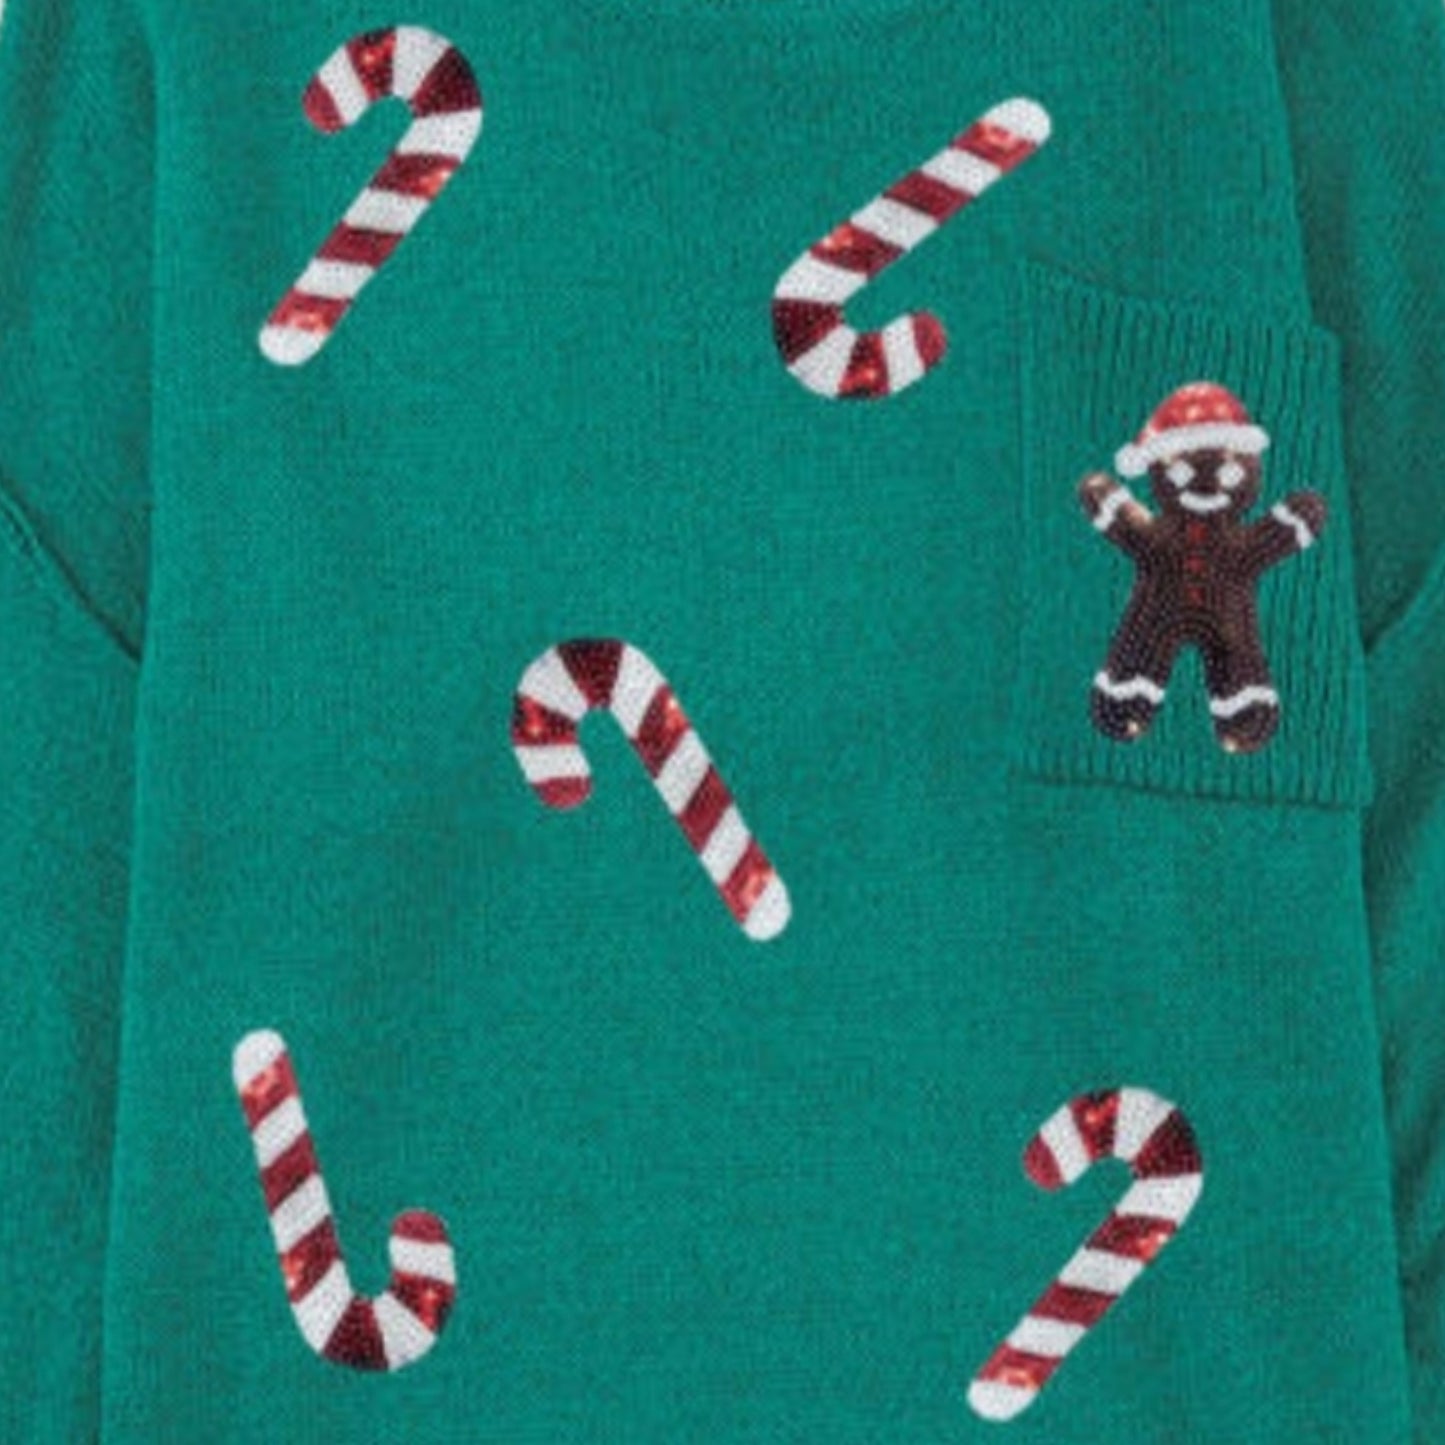 Sequin Candy Cane Gingerbread Man Knit Boat Neck Holiday Oversized Sweater